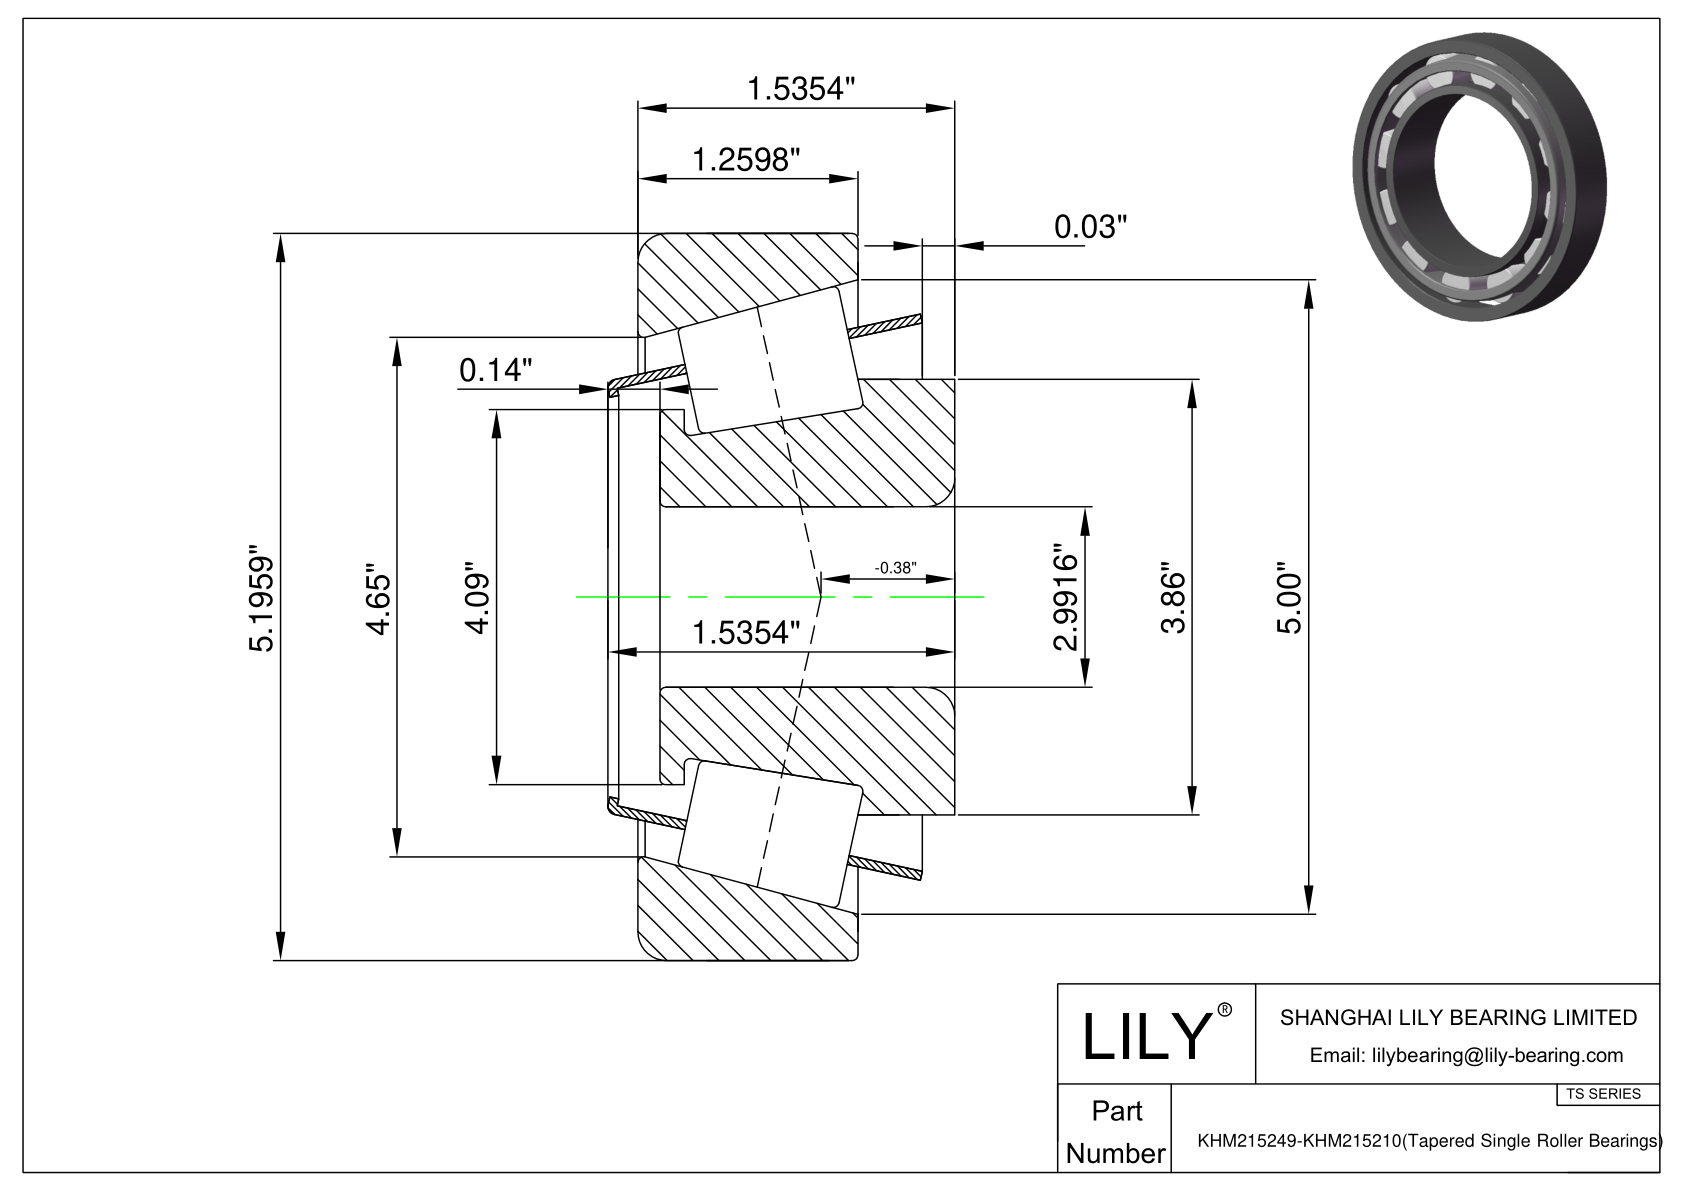 KHM215249-KHM215210 TS (Tapered Single Roller Bearings) (Imperial) cad drawing